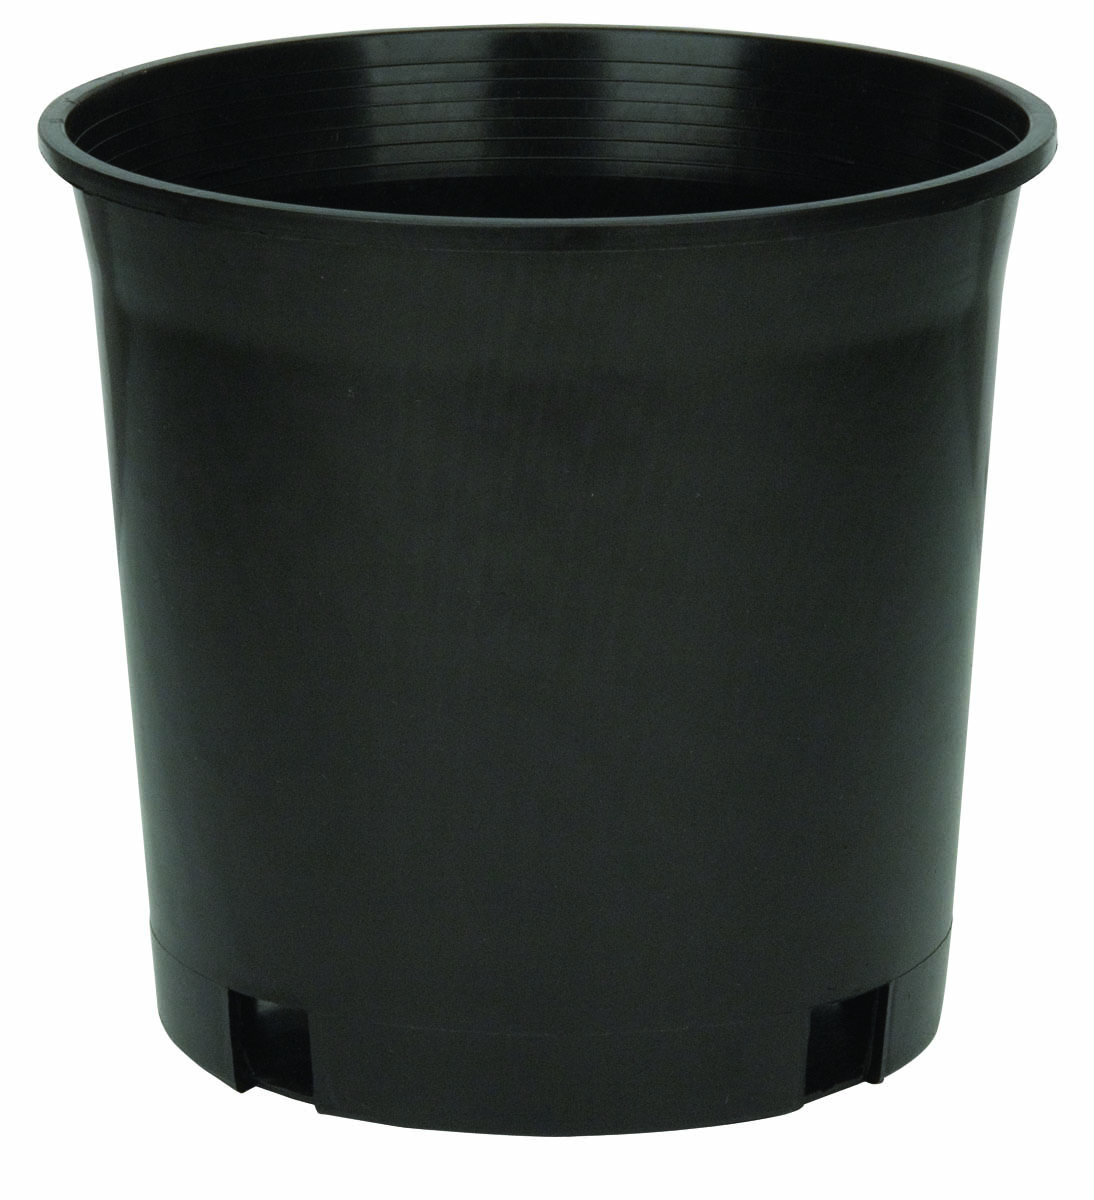 Picture for Pro Cal Premium Nursery Pot, 2 gal